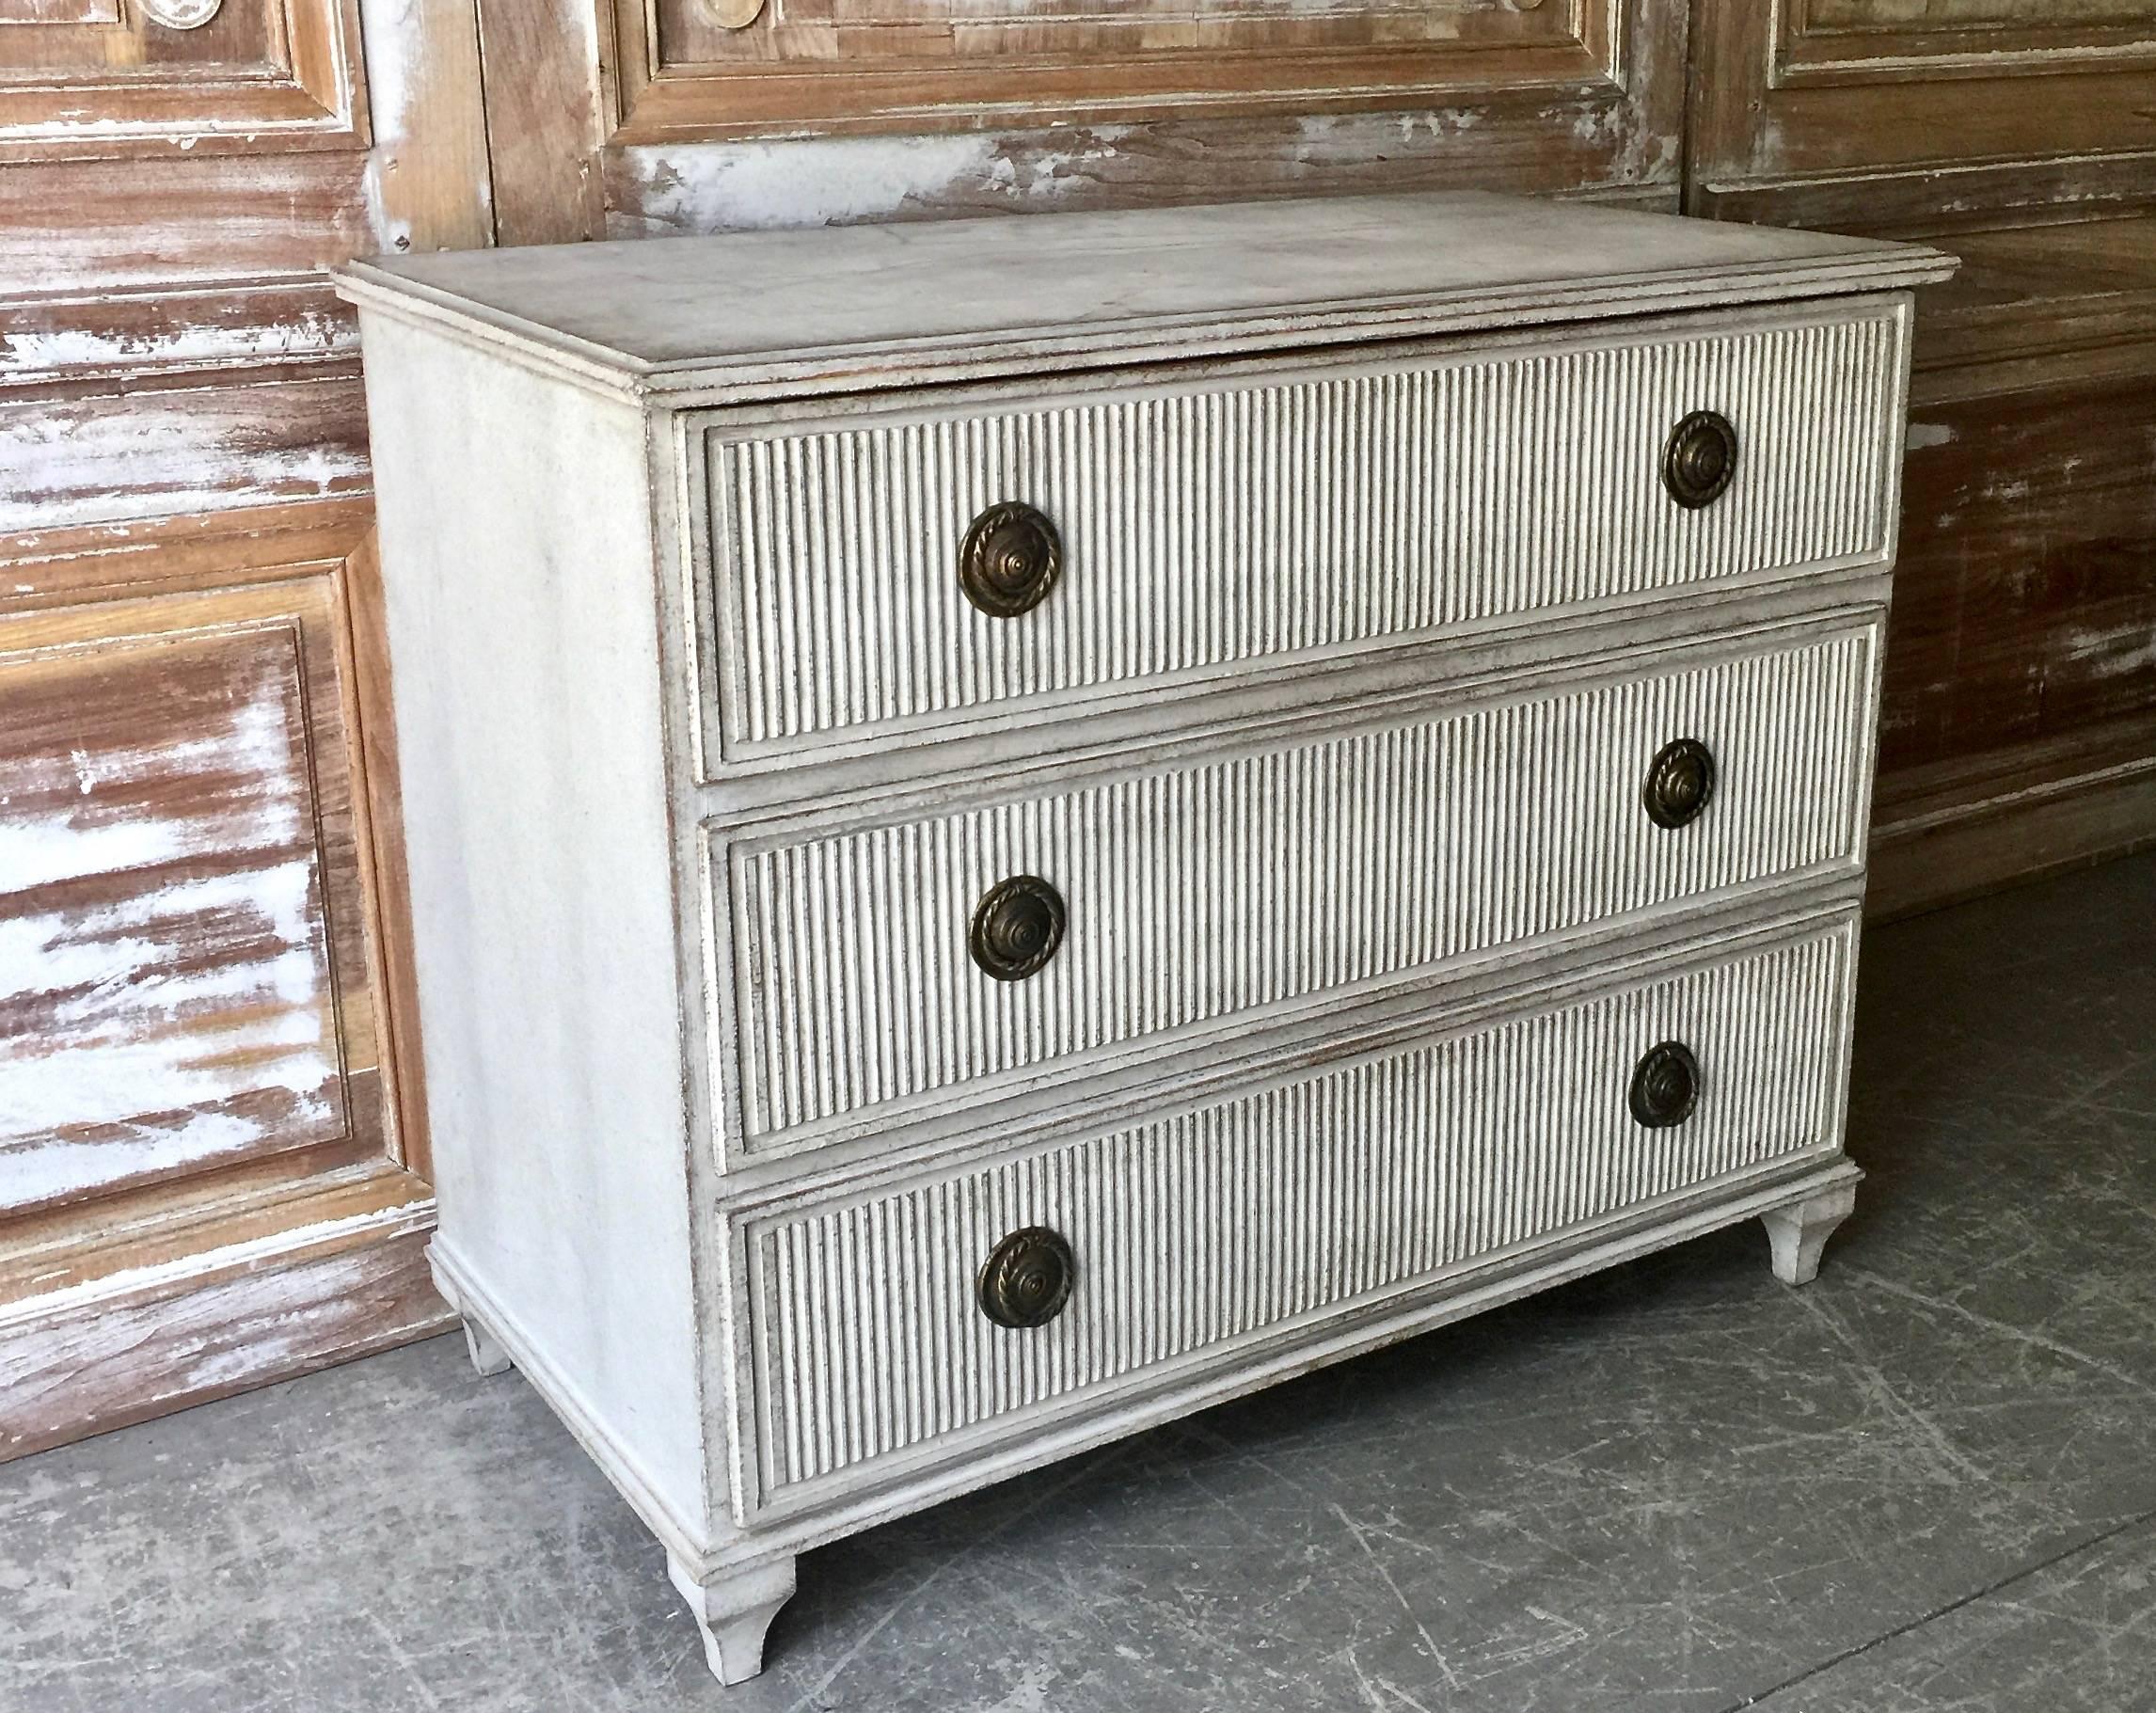 Early 19th century period Swedish Gustavian chest of drawers with Classic reeded drawer fronts with beautiful large bronce fittings, in palest gray color.
Sweden, circa 1805.
Here are few examples surprising pieces and objects, authentic,